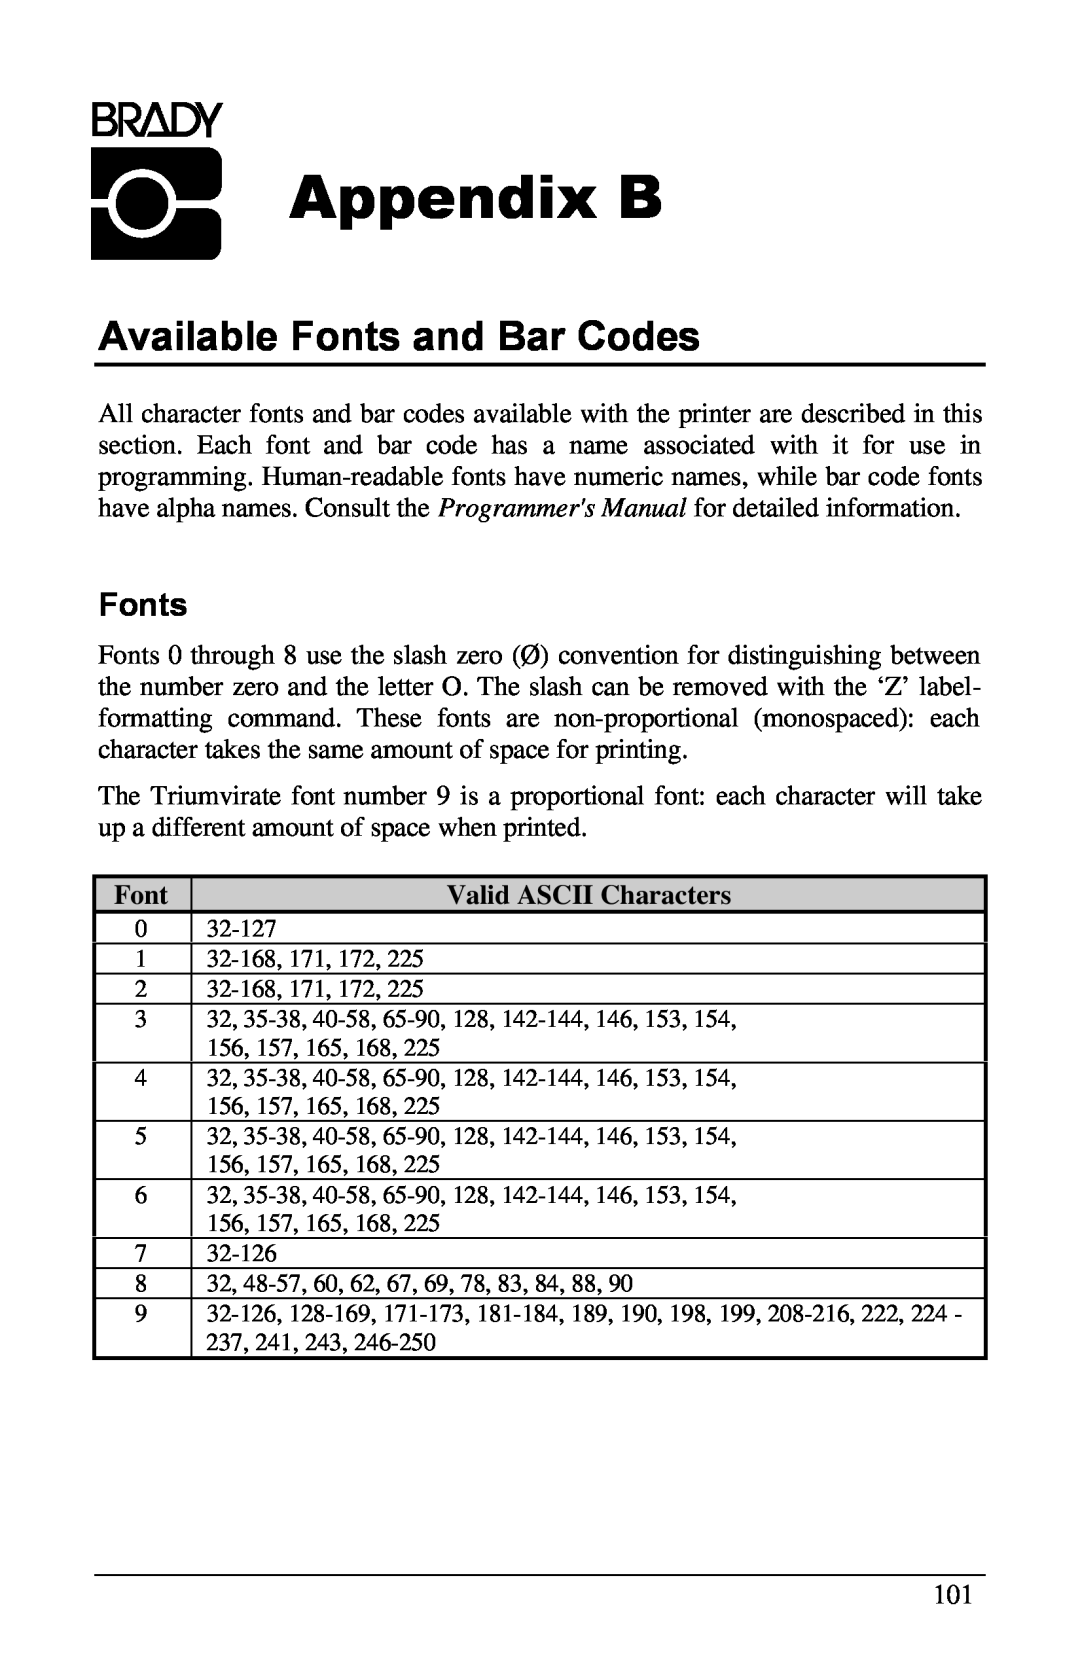 Brady 3481, 6441, 2461 manual Appendix B, Available Fonts and Bar Codes, Valid ASCII Characters 